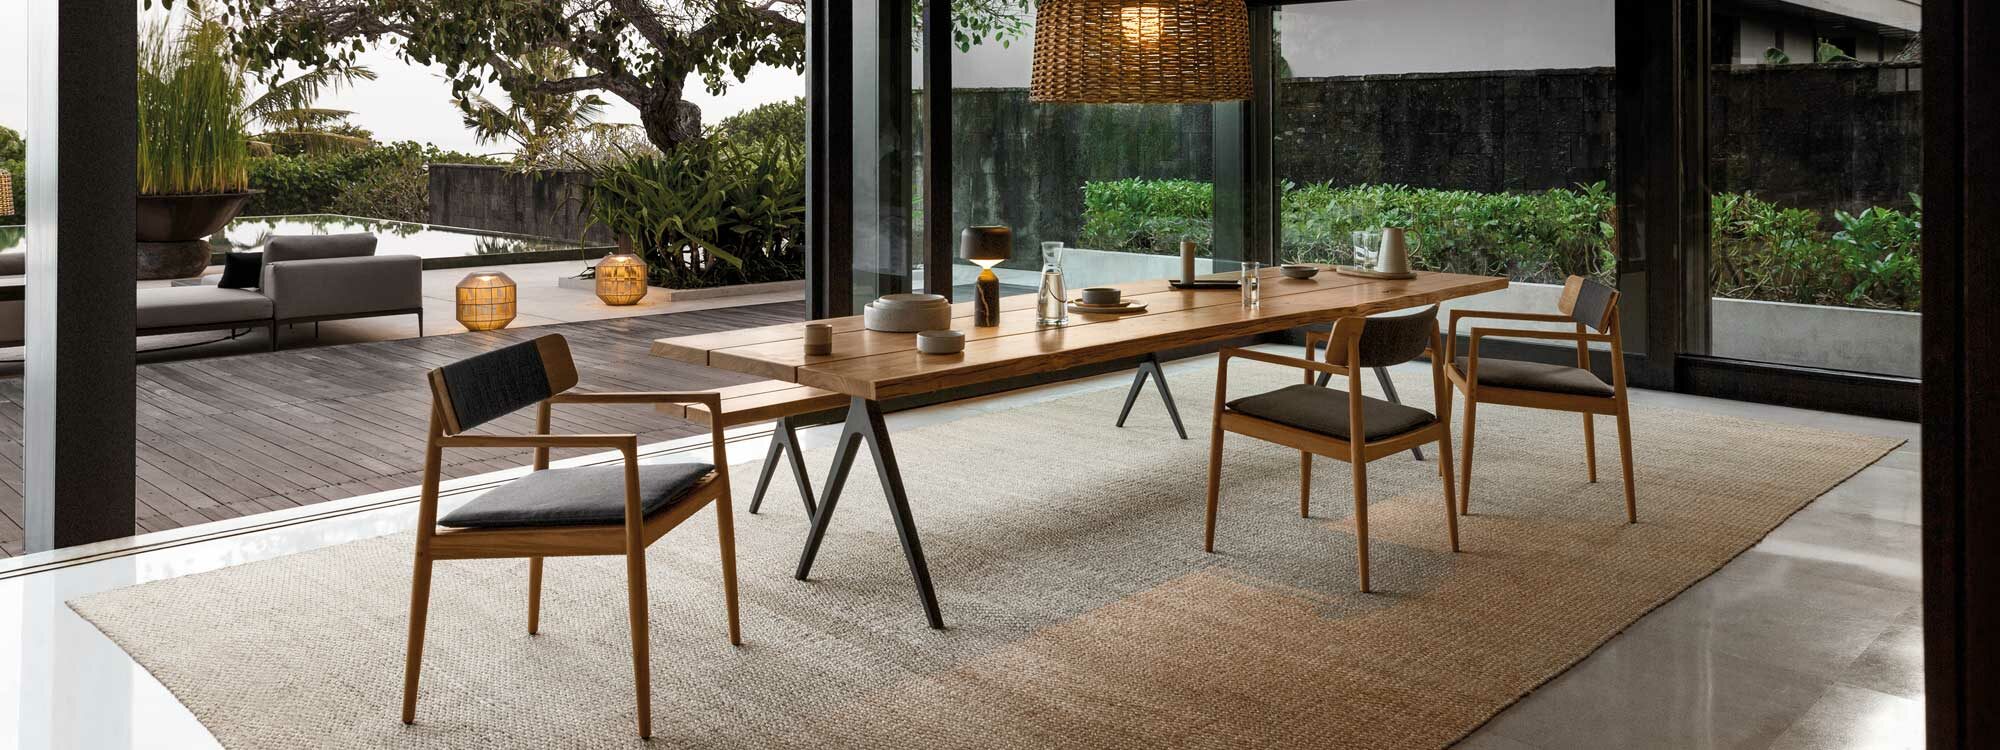 Image of Gloster Archi teak dining chairs and Raw long garden dining table